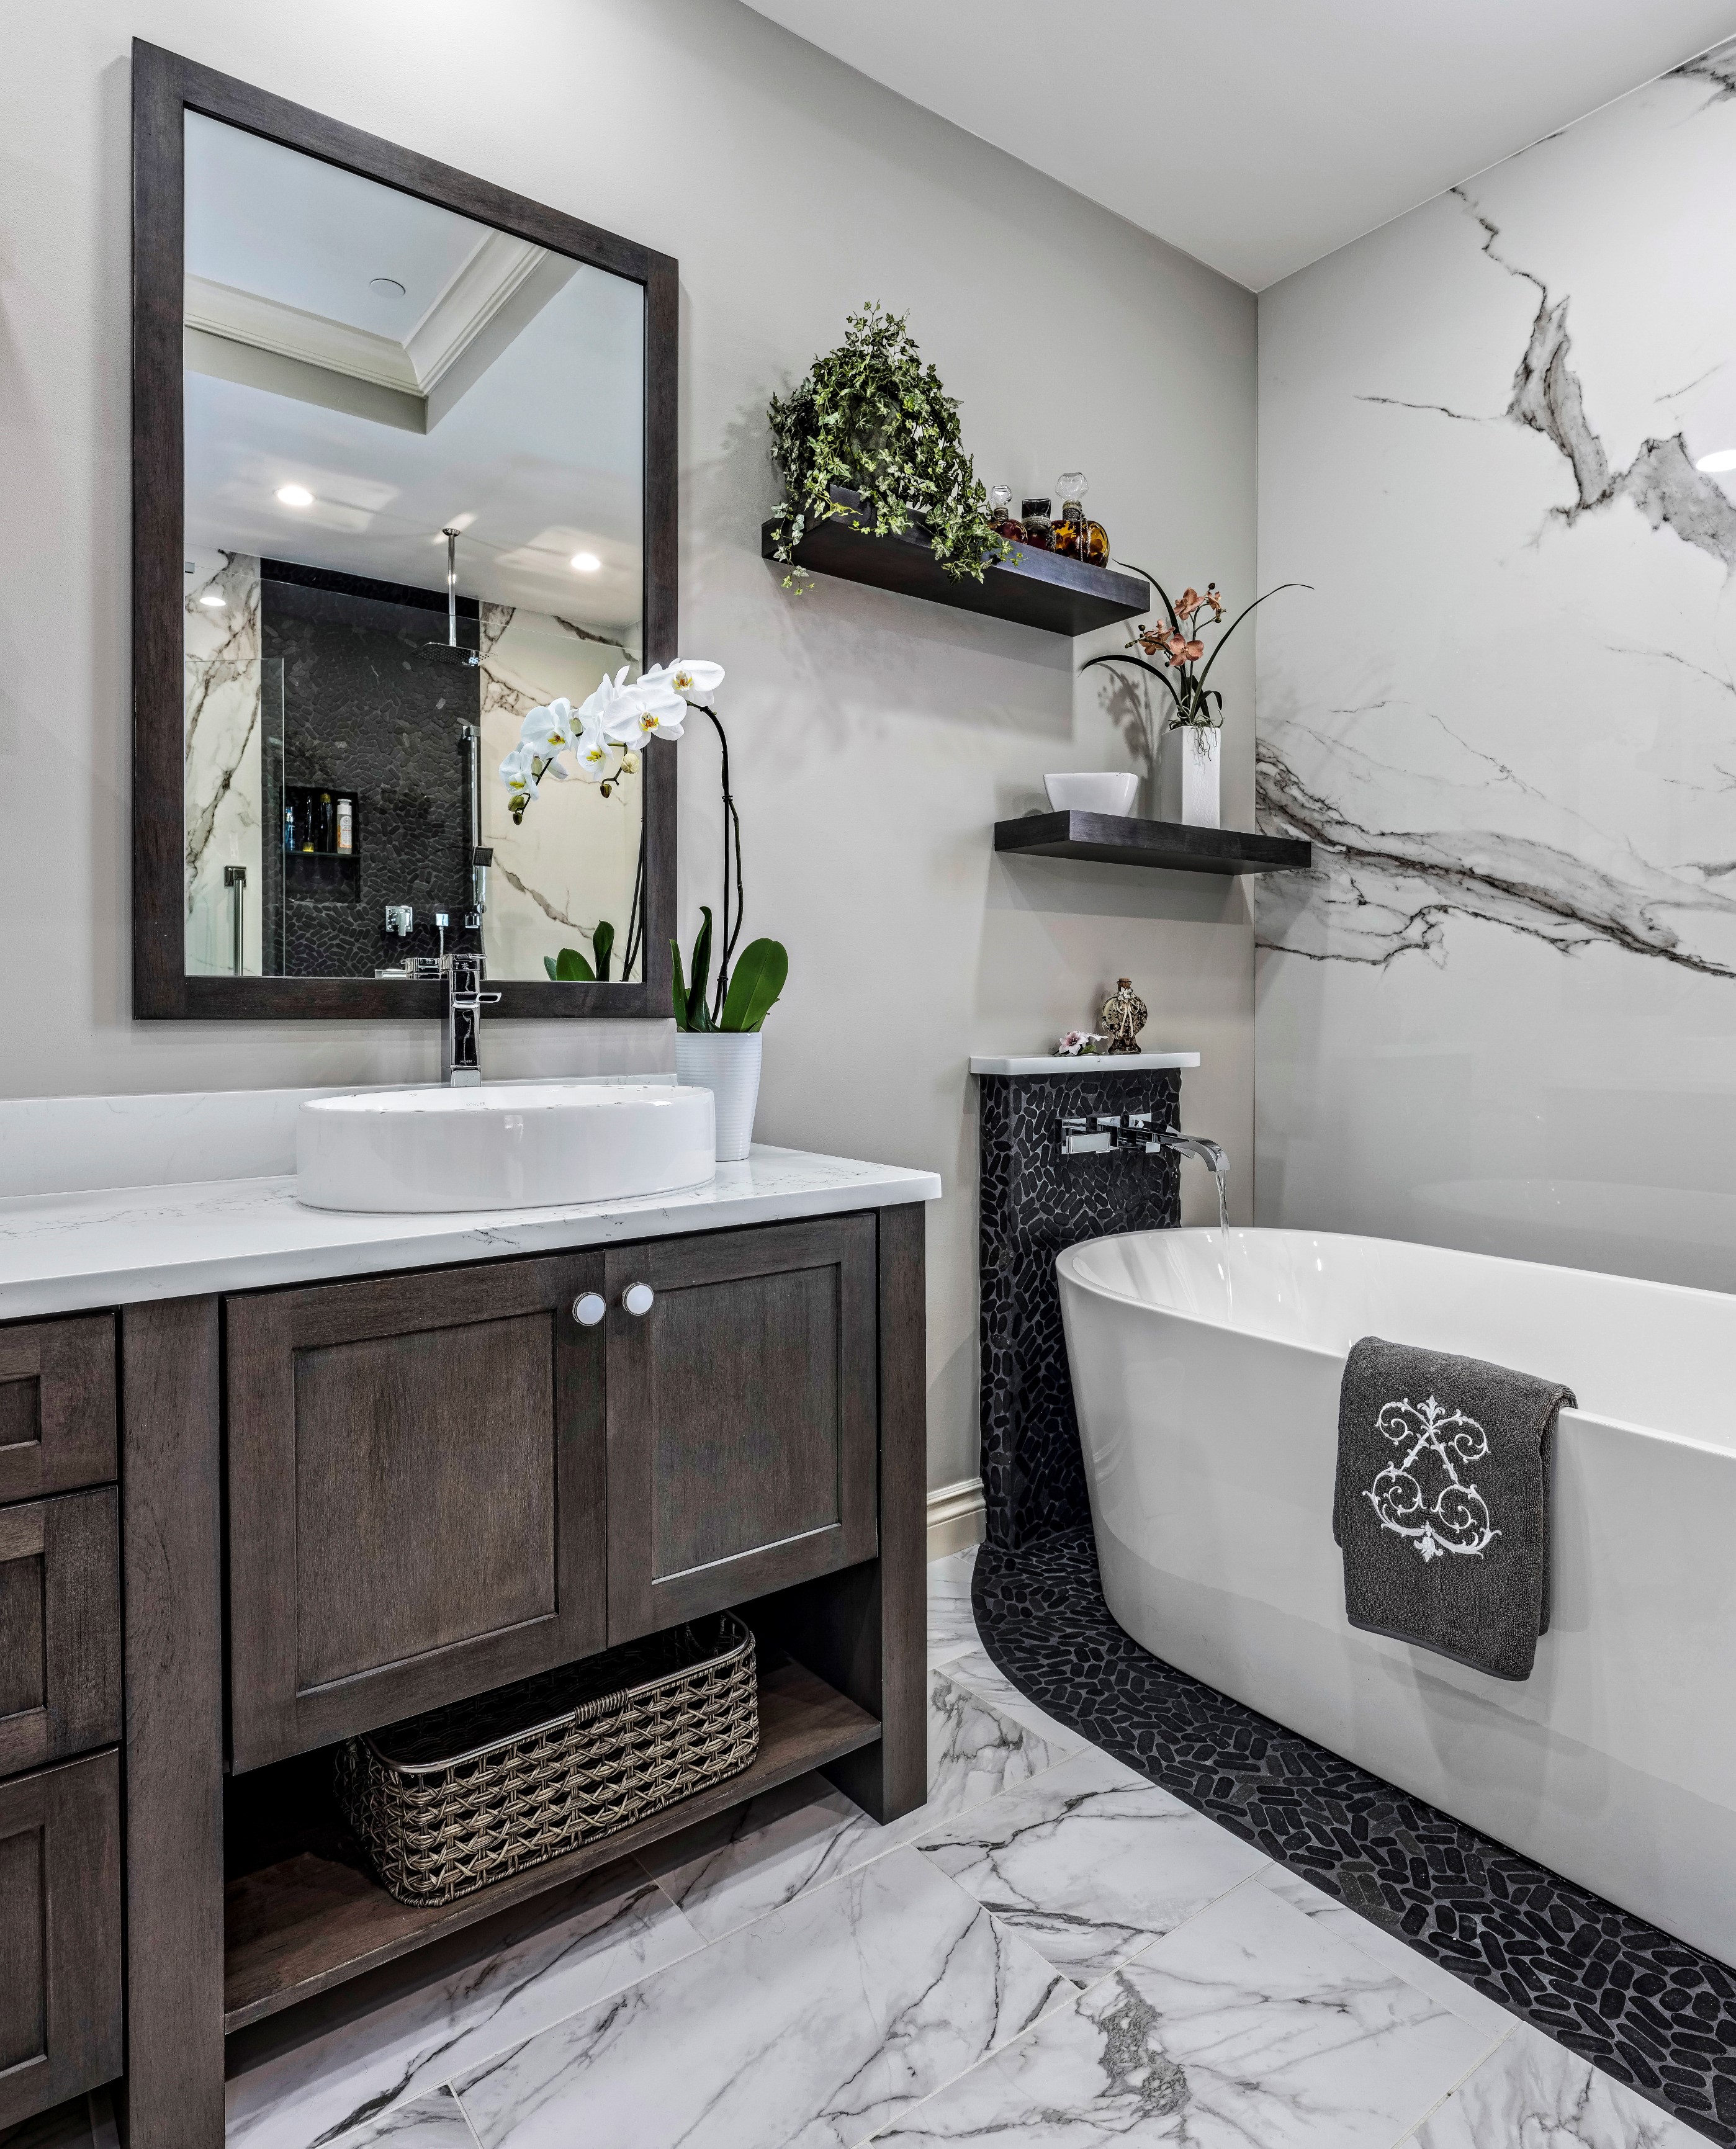 Bathroom Remodeling Typically Cost, Average Cost Small Bathroom Remodel